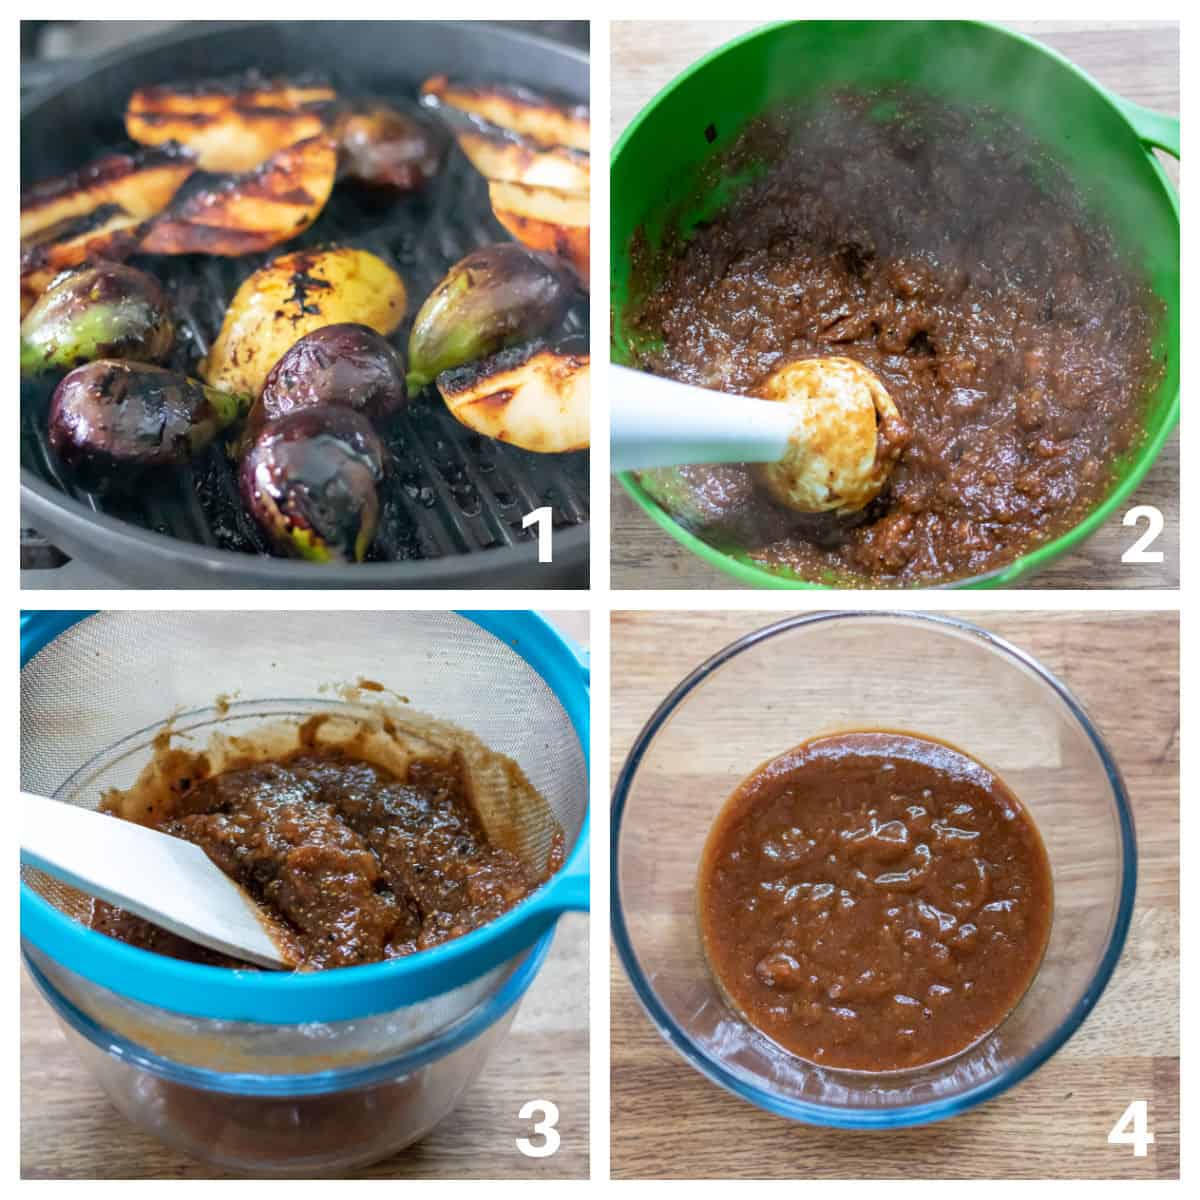 Grilling figs and pears, then pureeing and sieving into coulis.